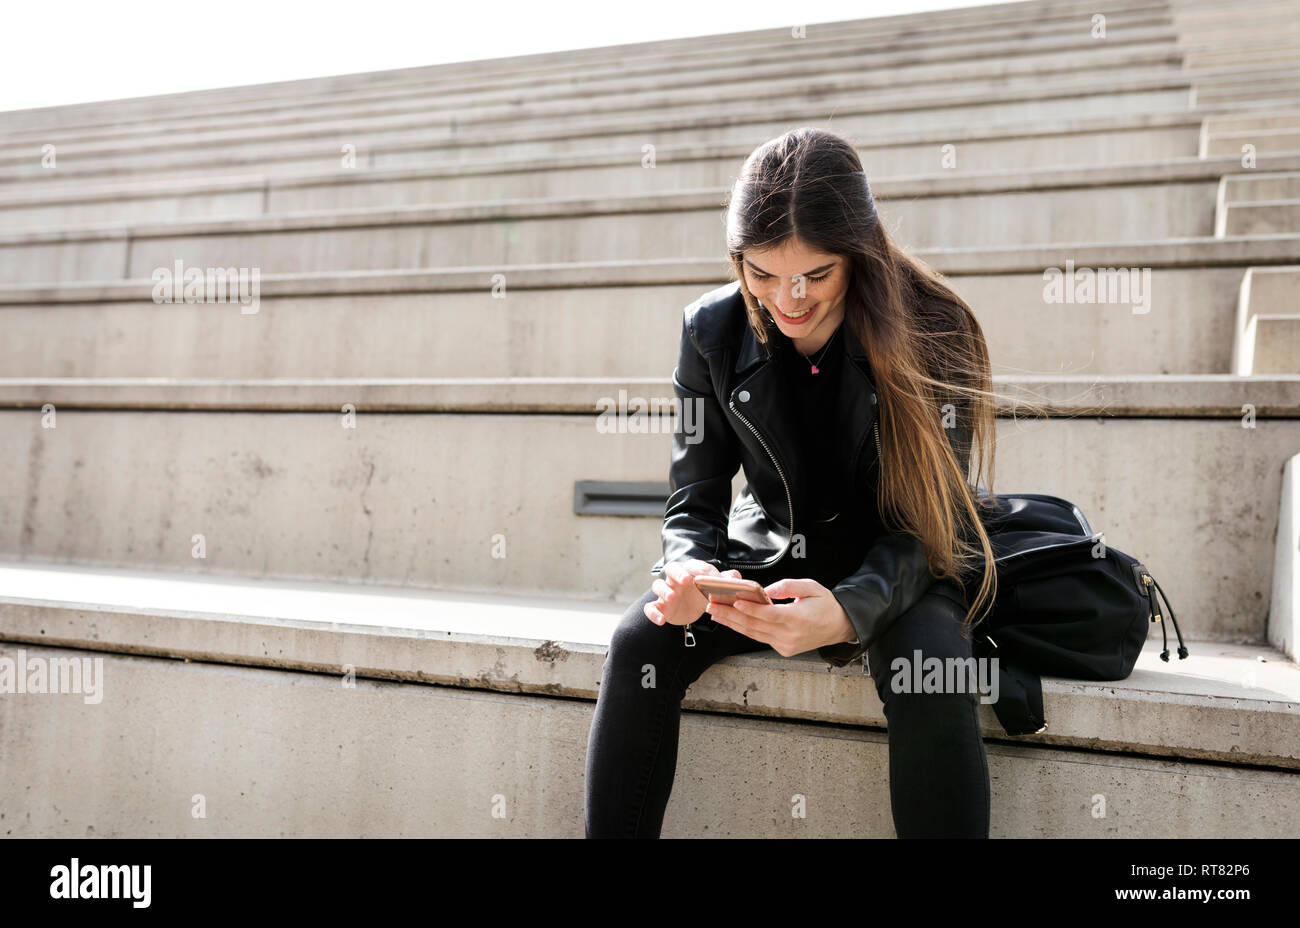 Smiling young woman sitting on stairs using cell phone Banque D'Images